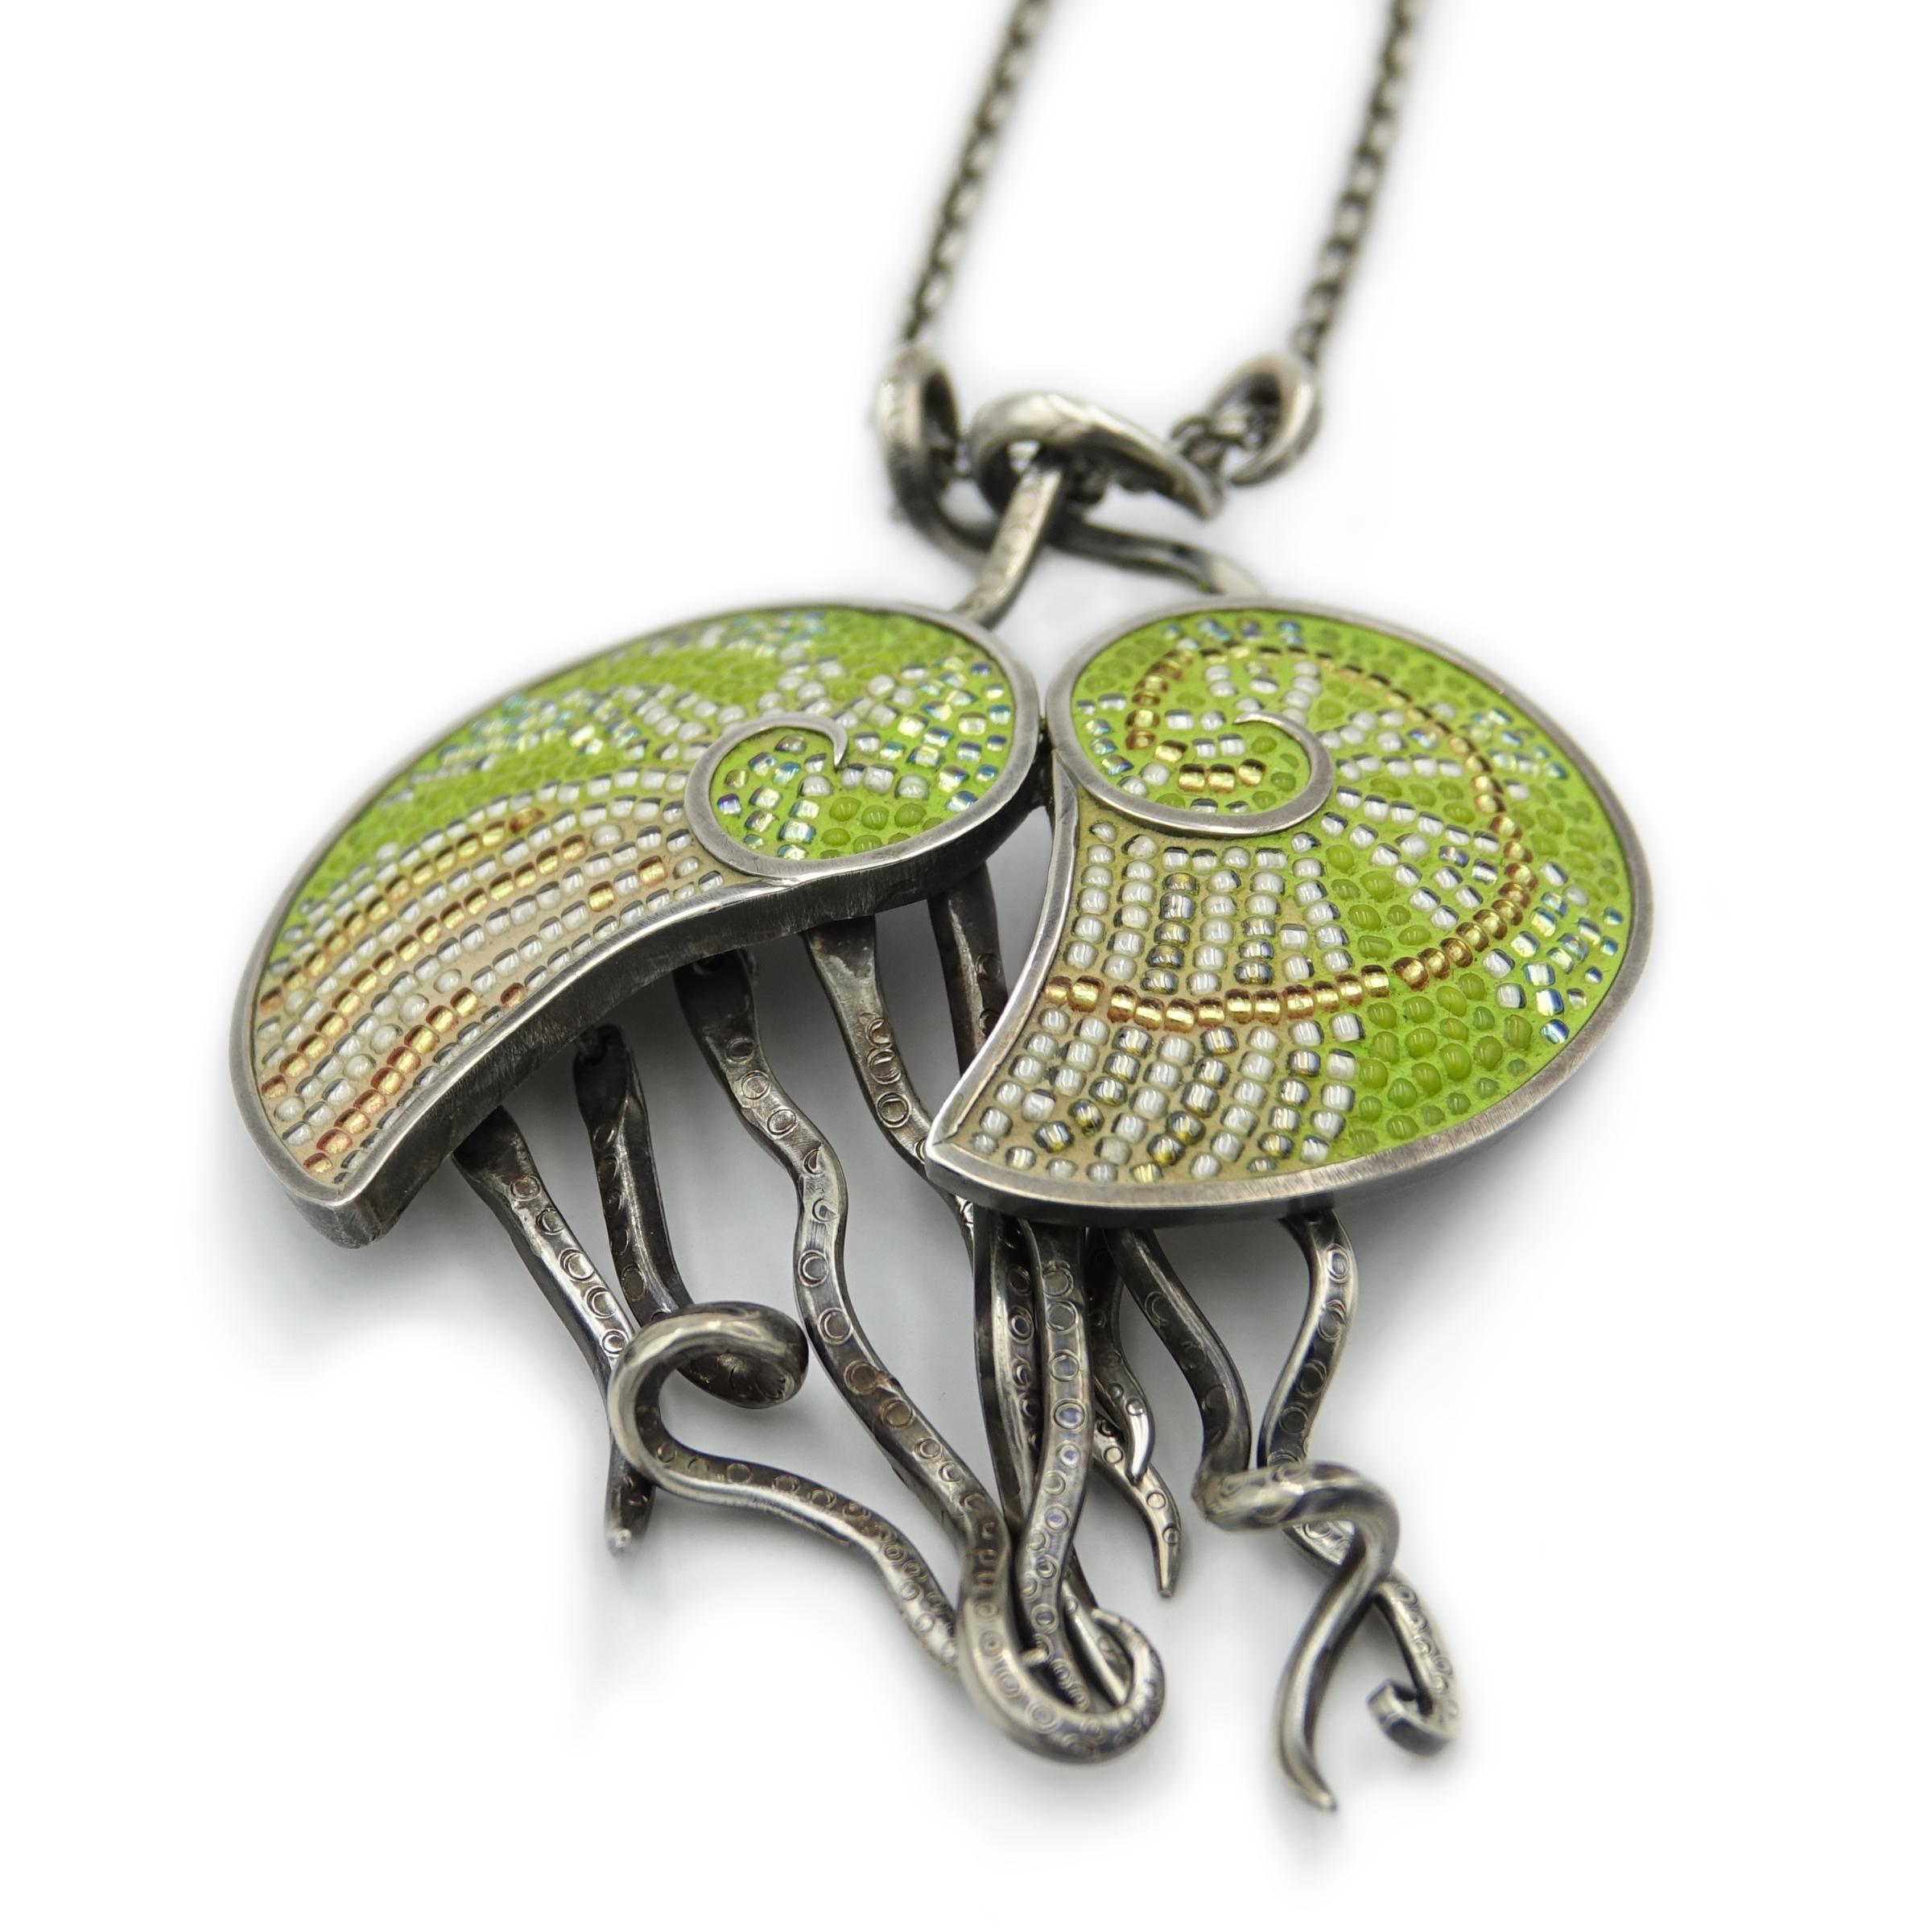 Nautilove: two green nautilus entwine in this micro-mosaic pendant on an adjustable sterling silver chain. Individual glass beads are inlaid into a hand-forged frame. The free-moving tentacles create a kinetic sculpture for your body. Each tentacle